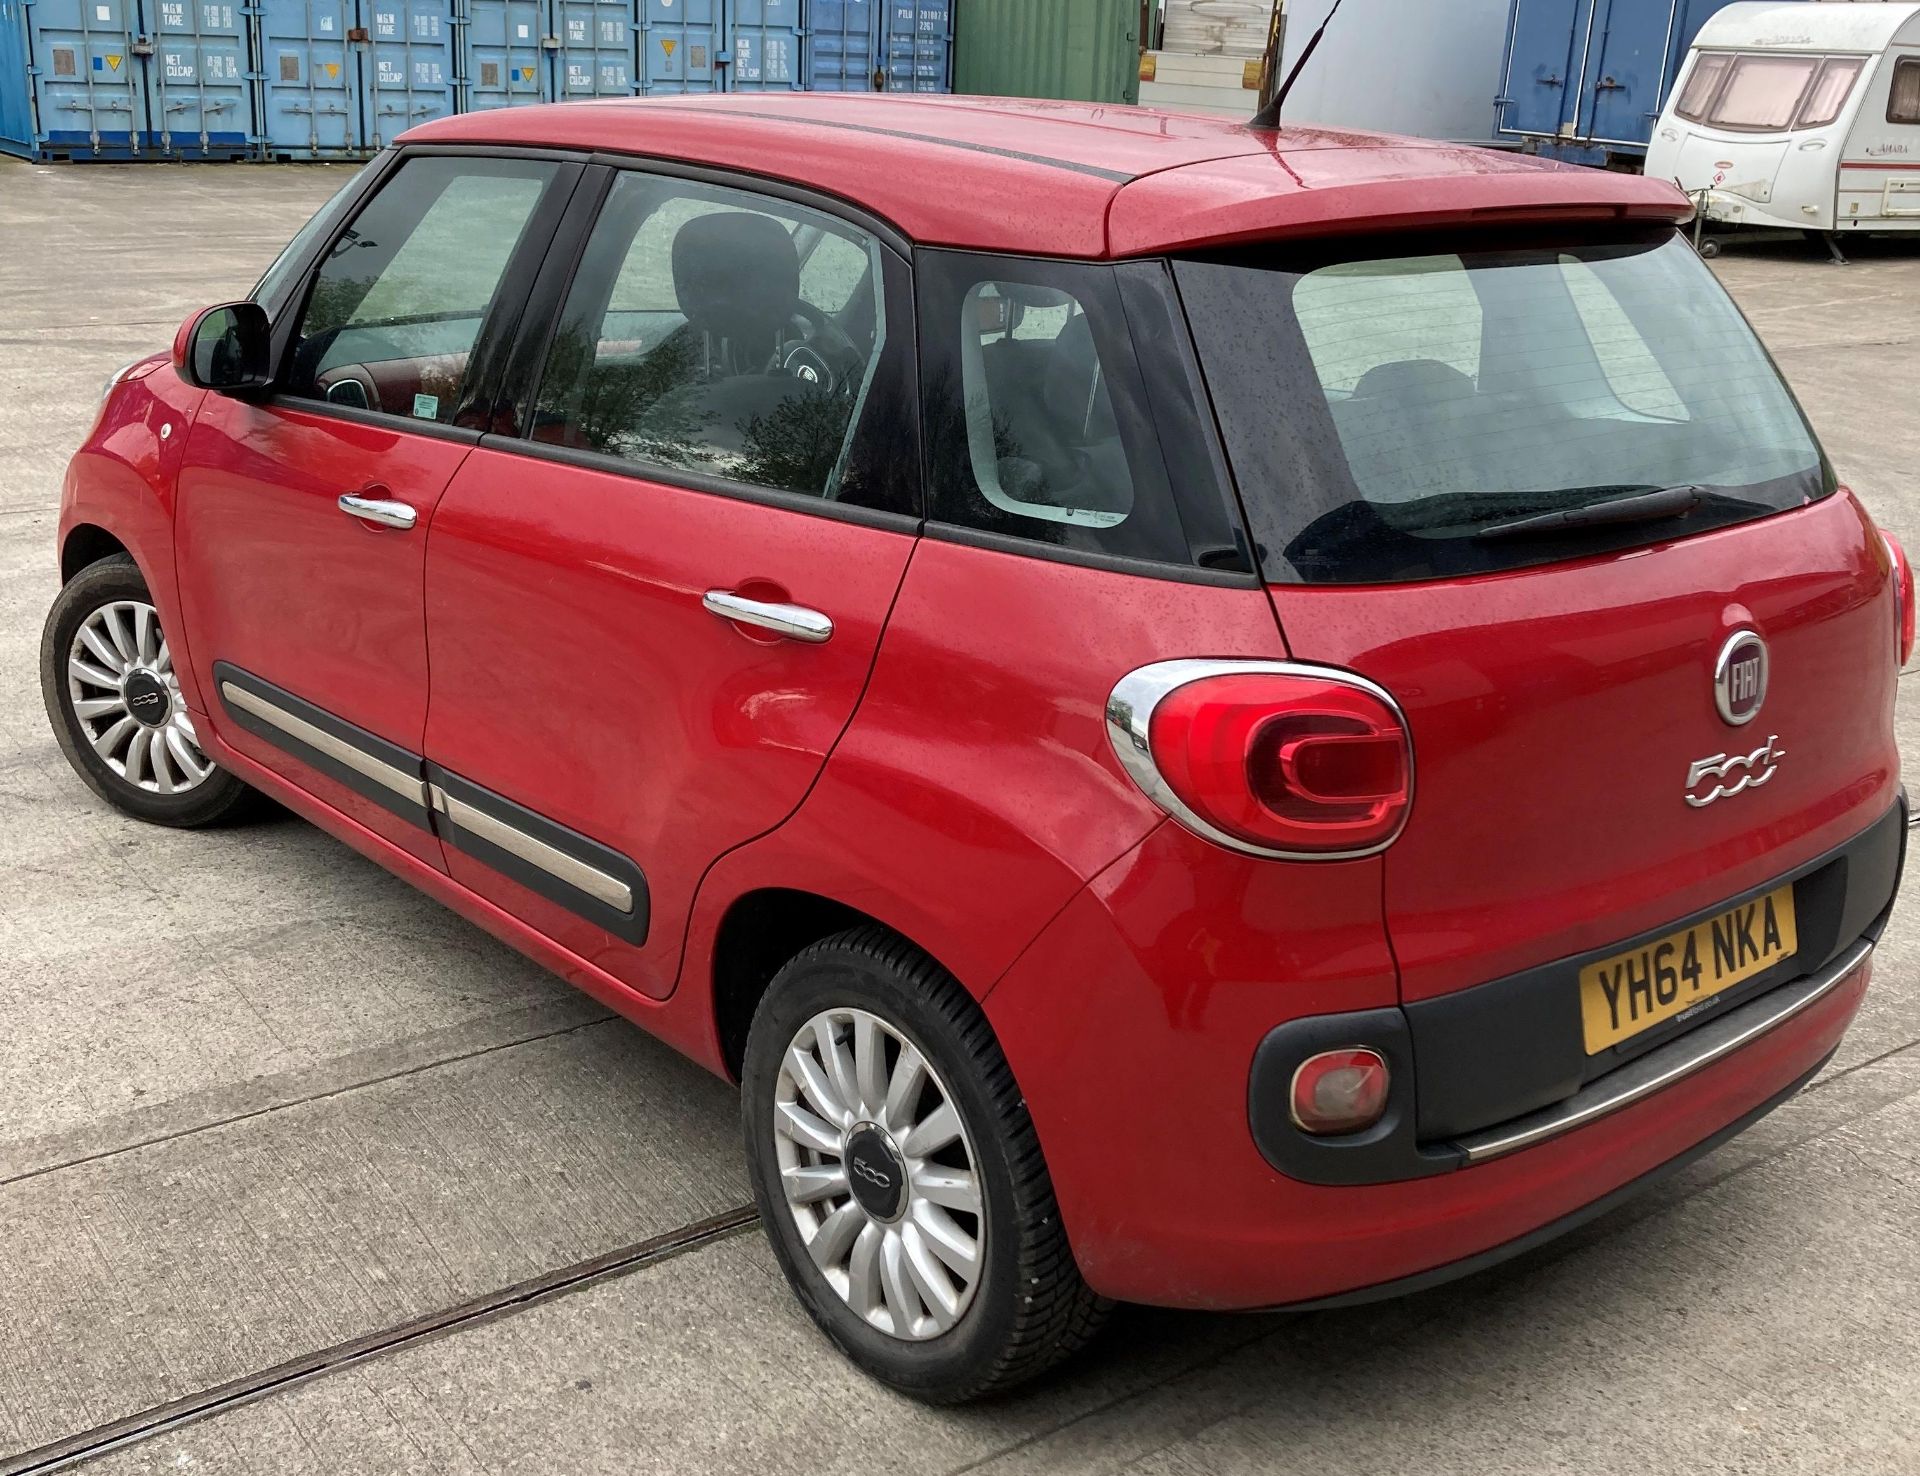 FIAT 500L POP STAR MULTI-JET 1.2 MPV - DIESEL - RED. On the instructions of: A retained client. - Image 6 of 16